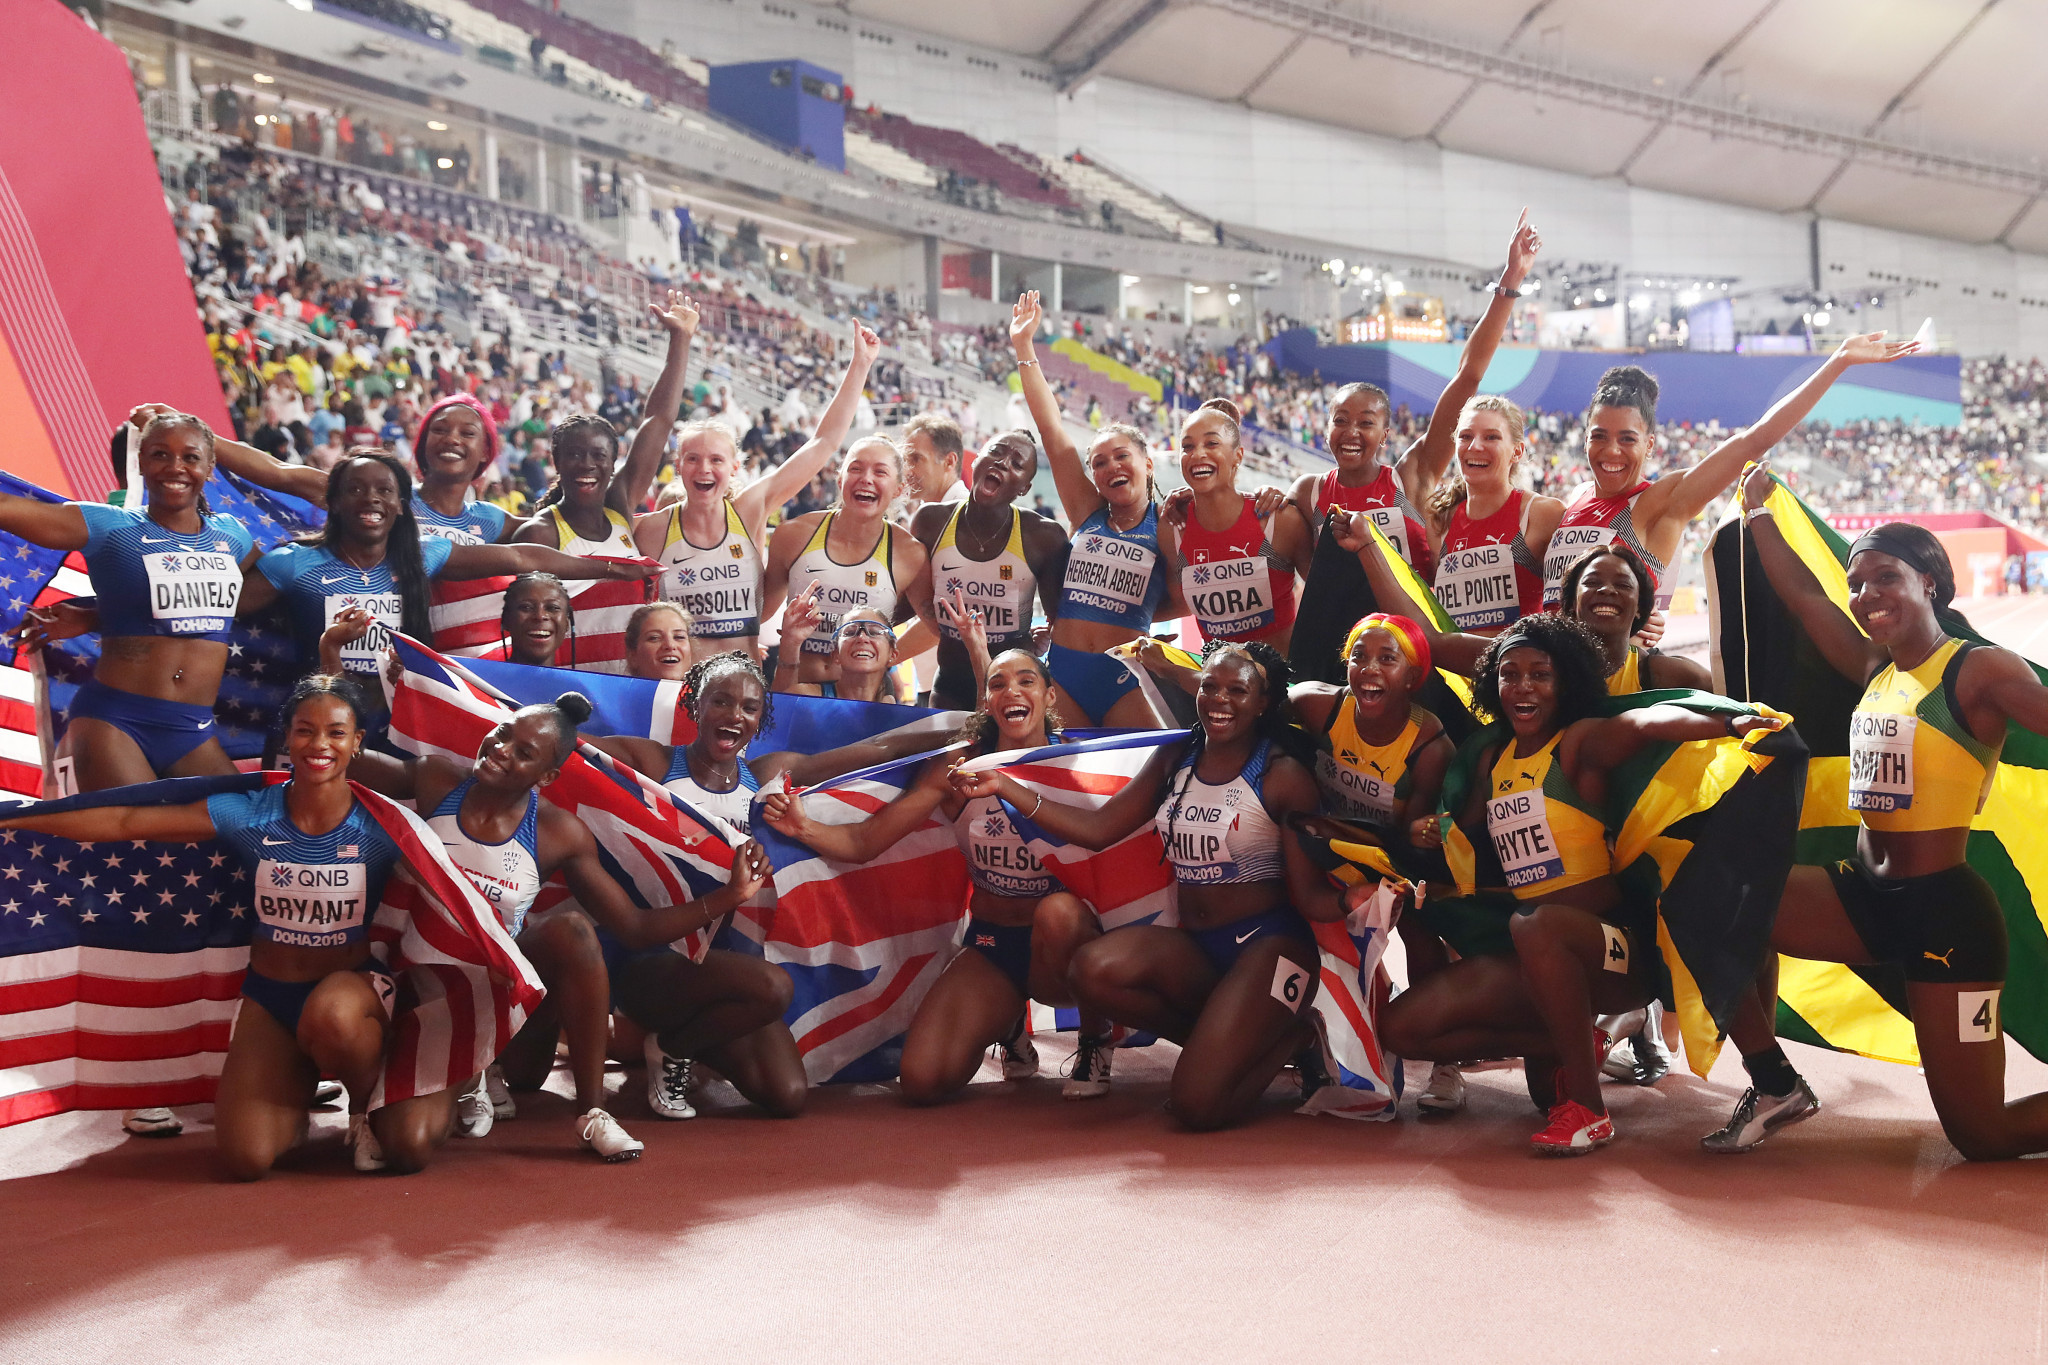 The women's 4x100m relay teams pose together at the end of their race ©Getty Images